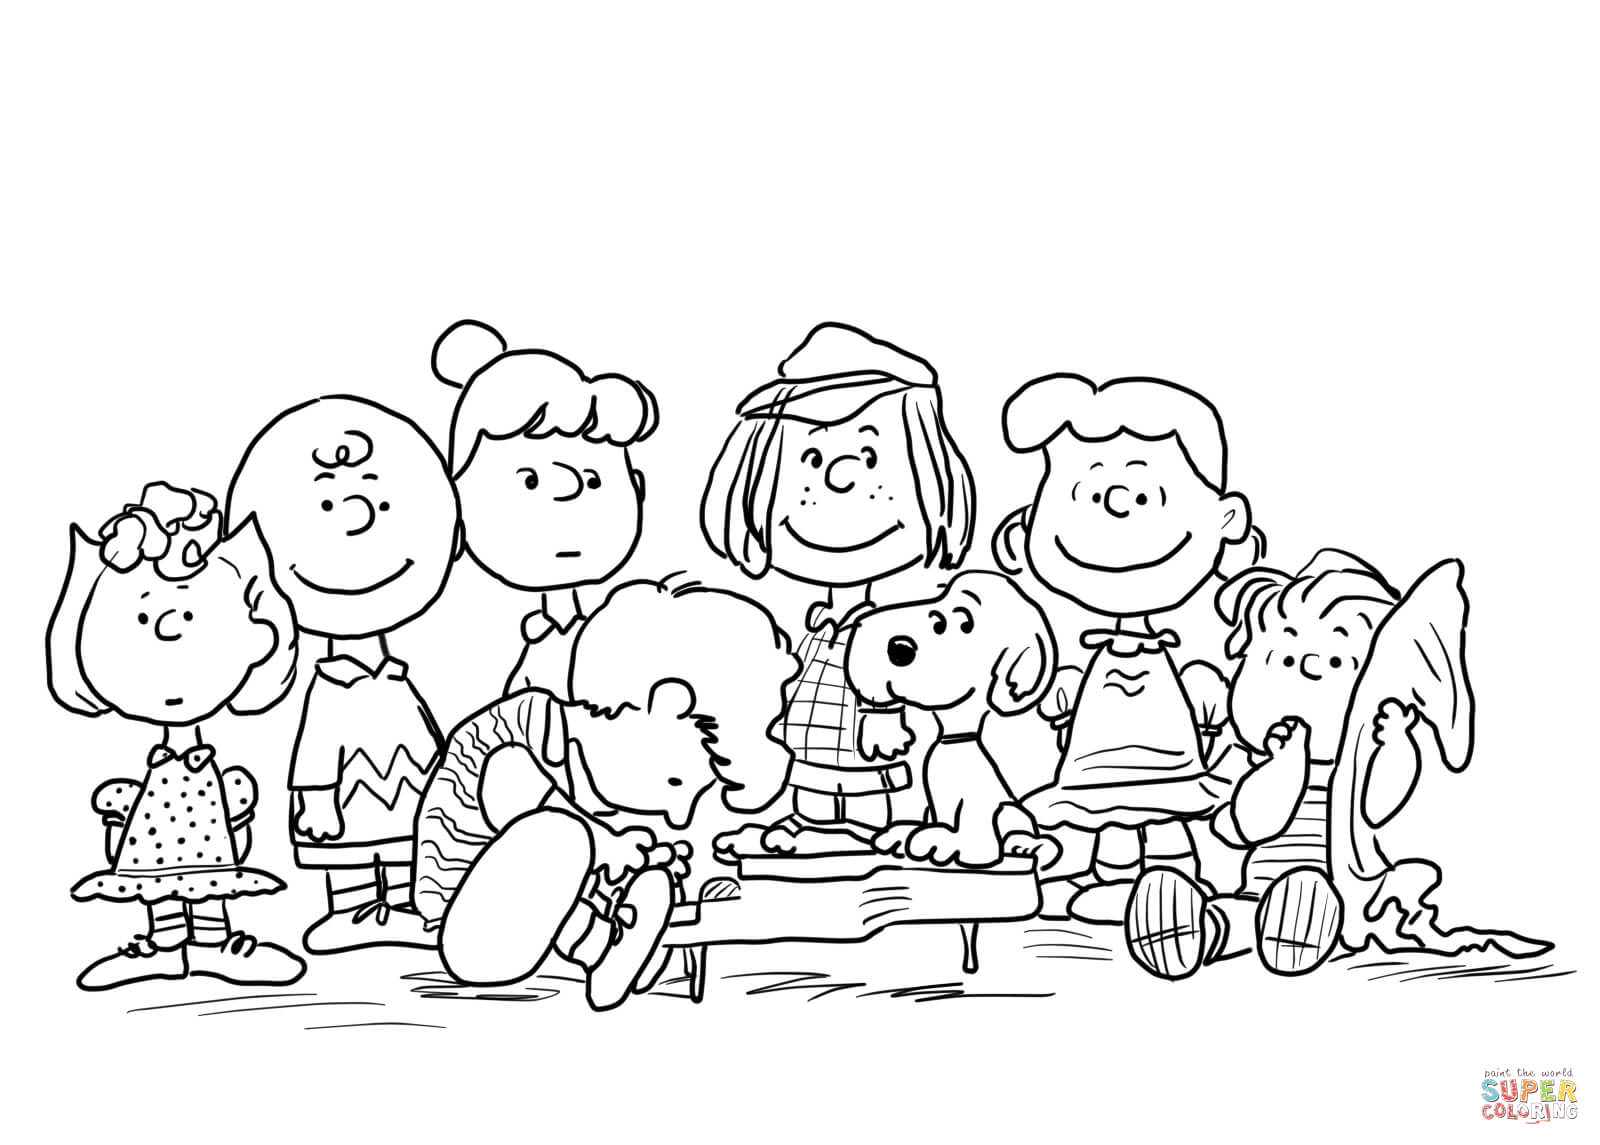 Charlie Brown Characters Coloring Pages - Coloring Home1600 x 1145